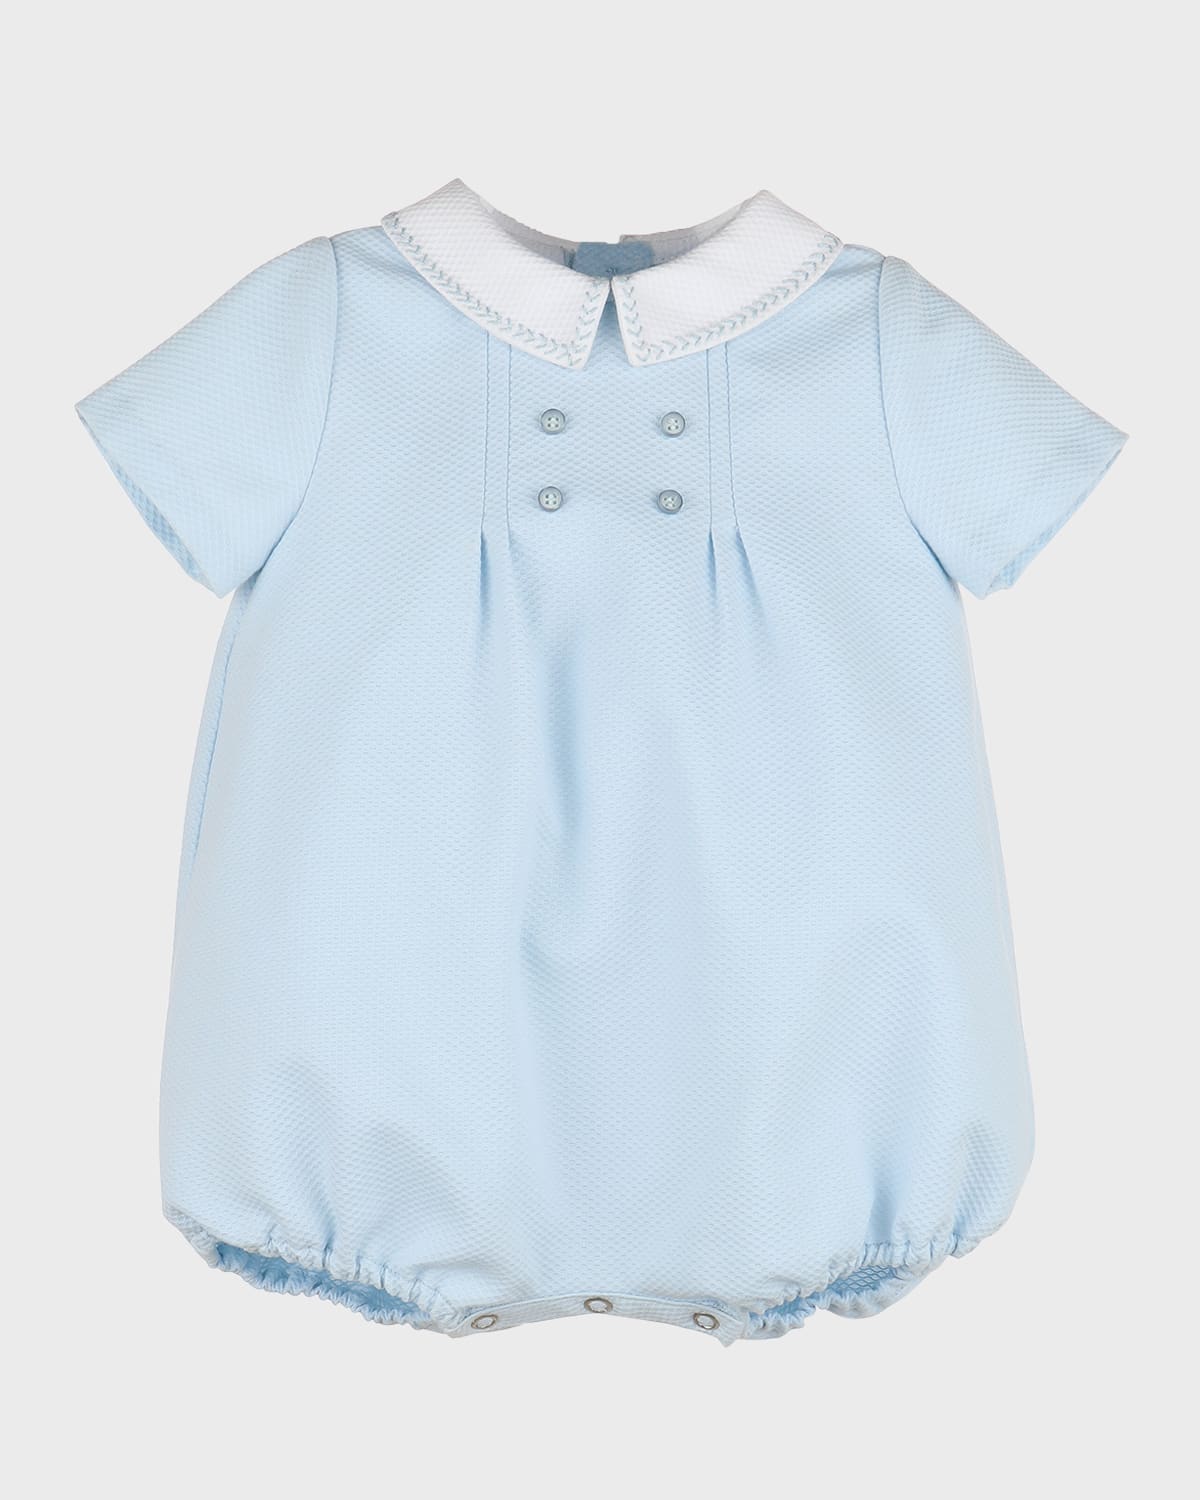 Boy's Bubble Collared Playsuit, Size 3M-24M